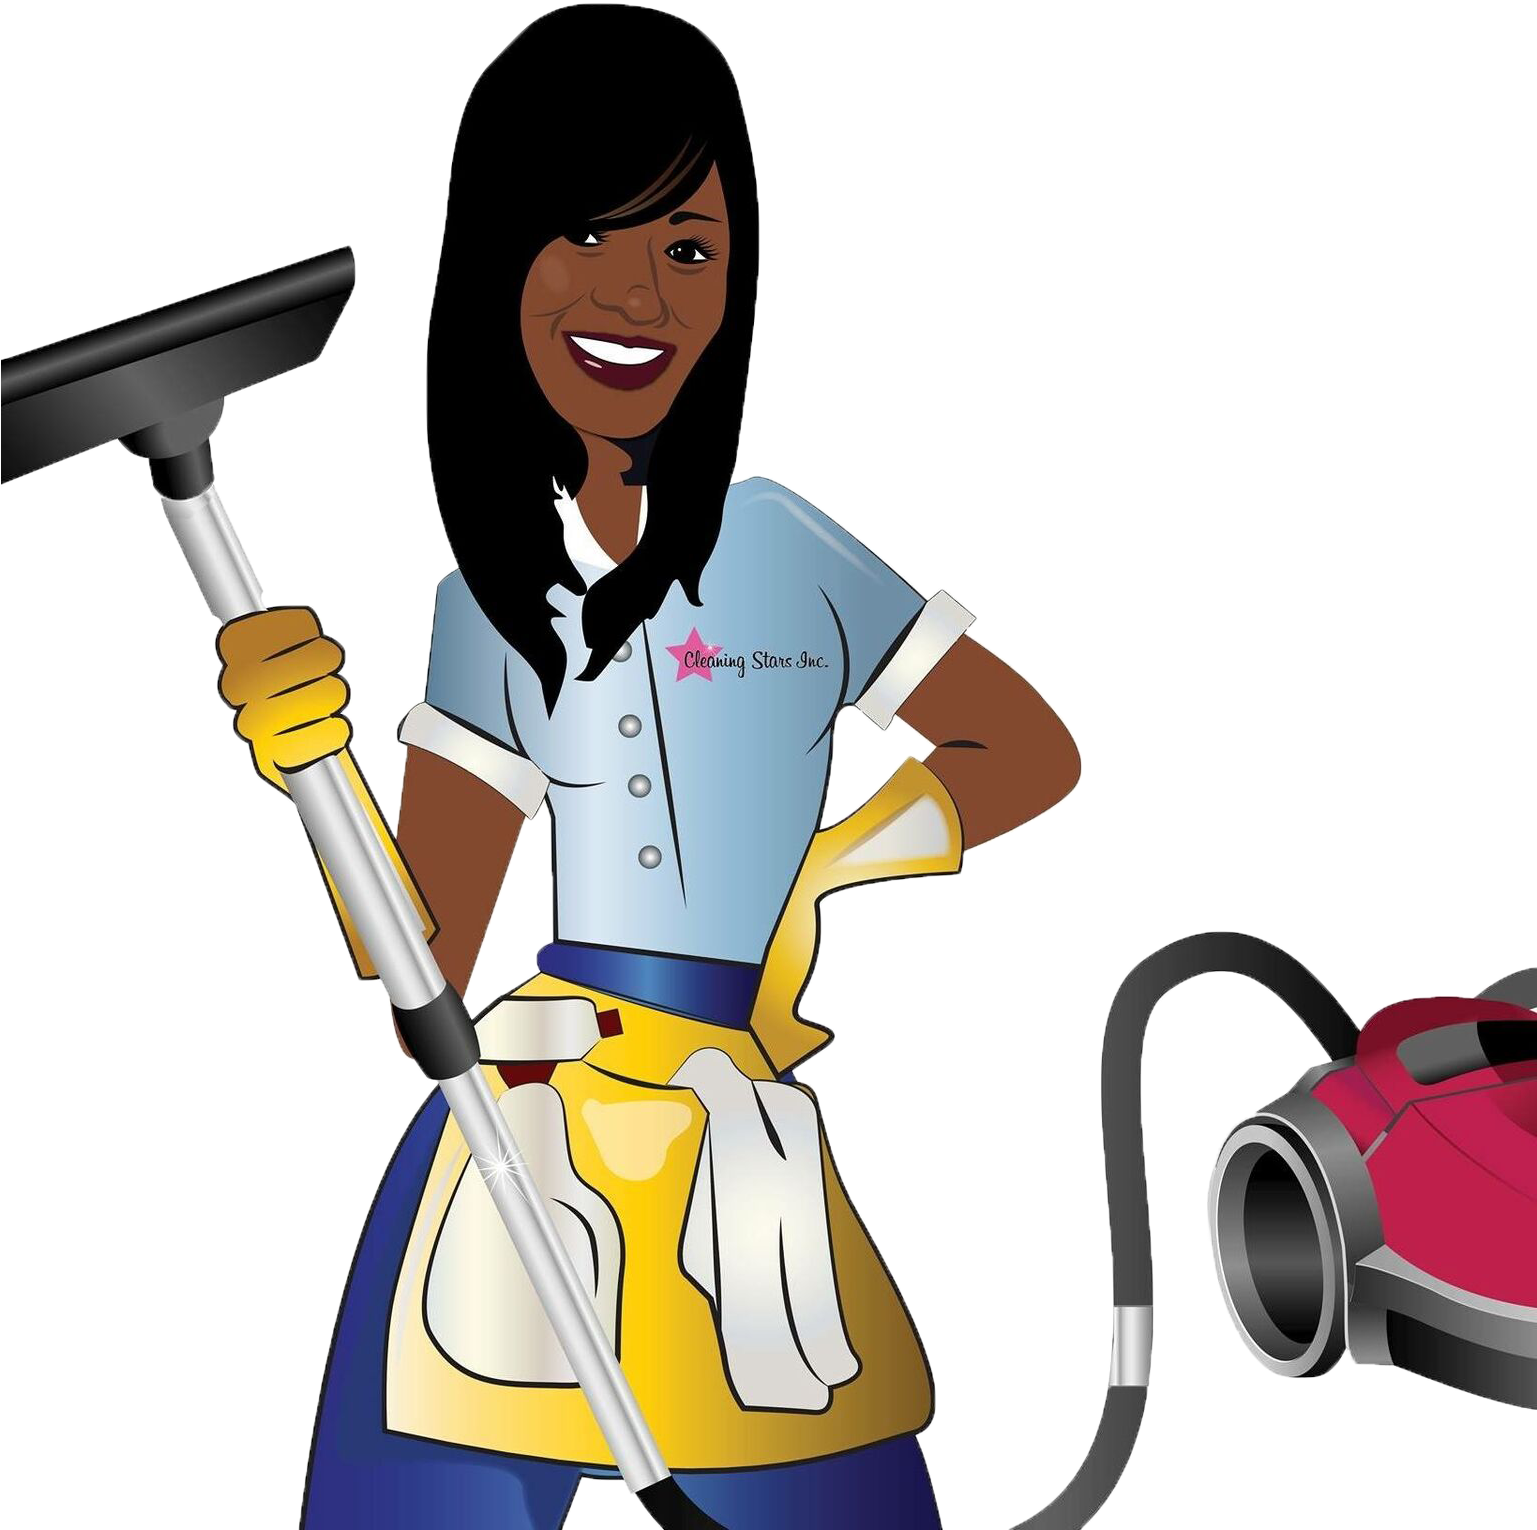 Cleaning Stars Inc - Commercial Cleaning (1536x1536)